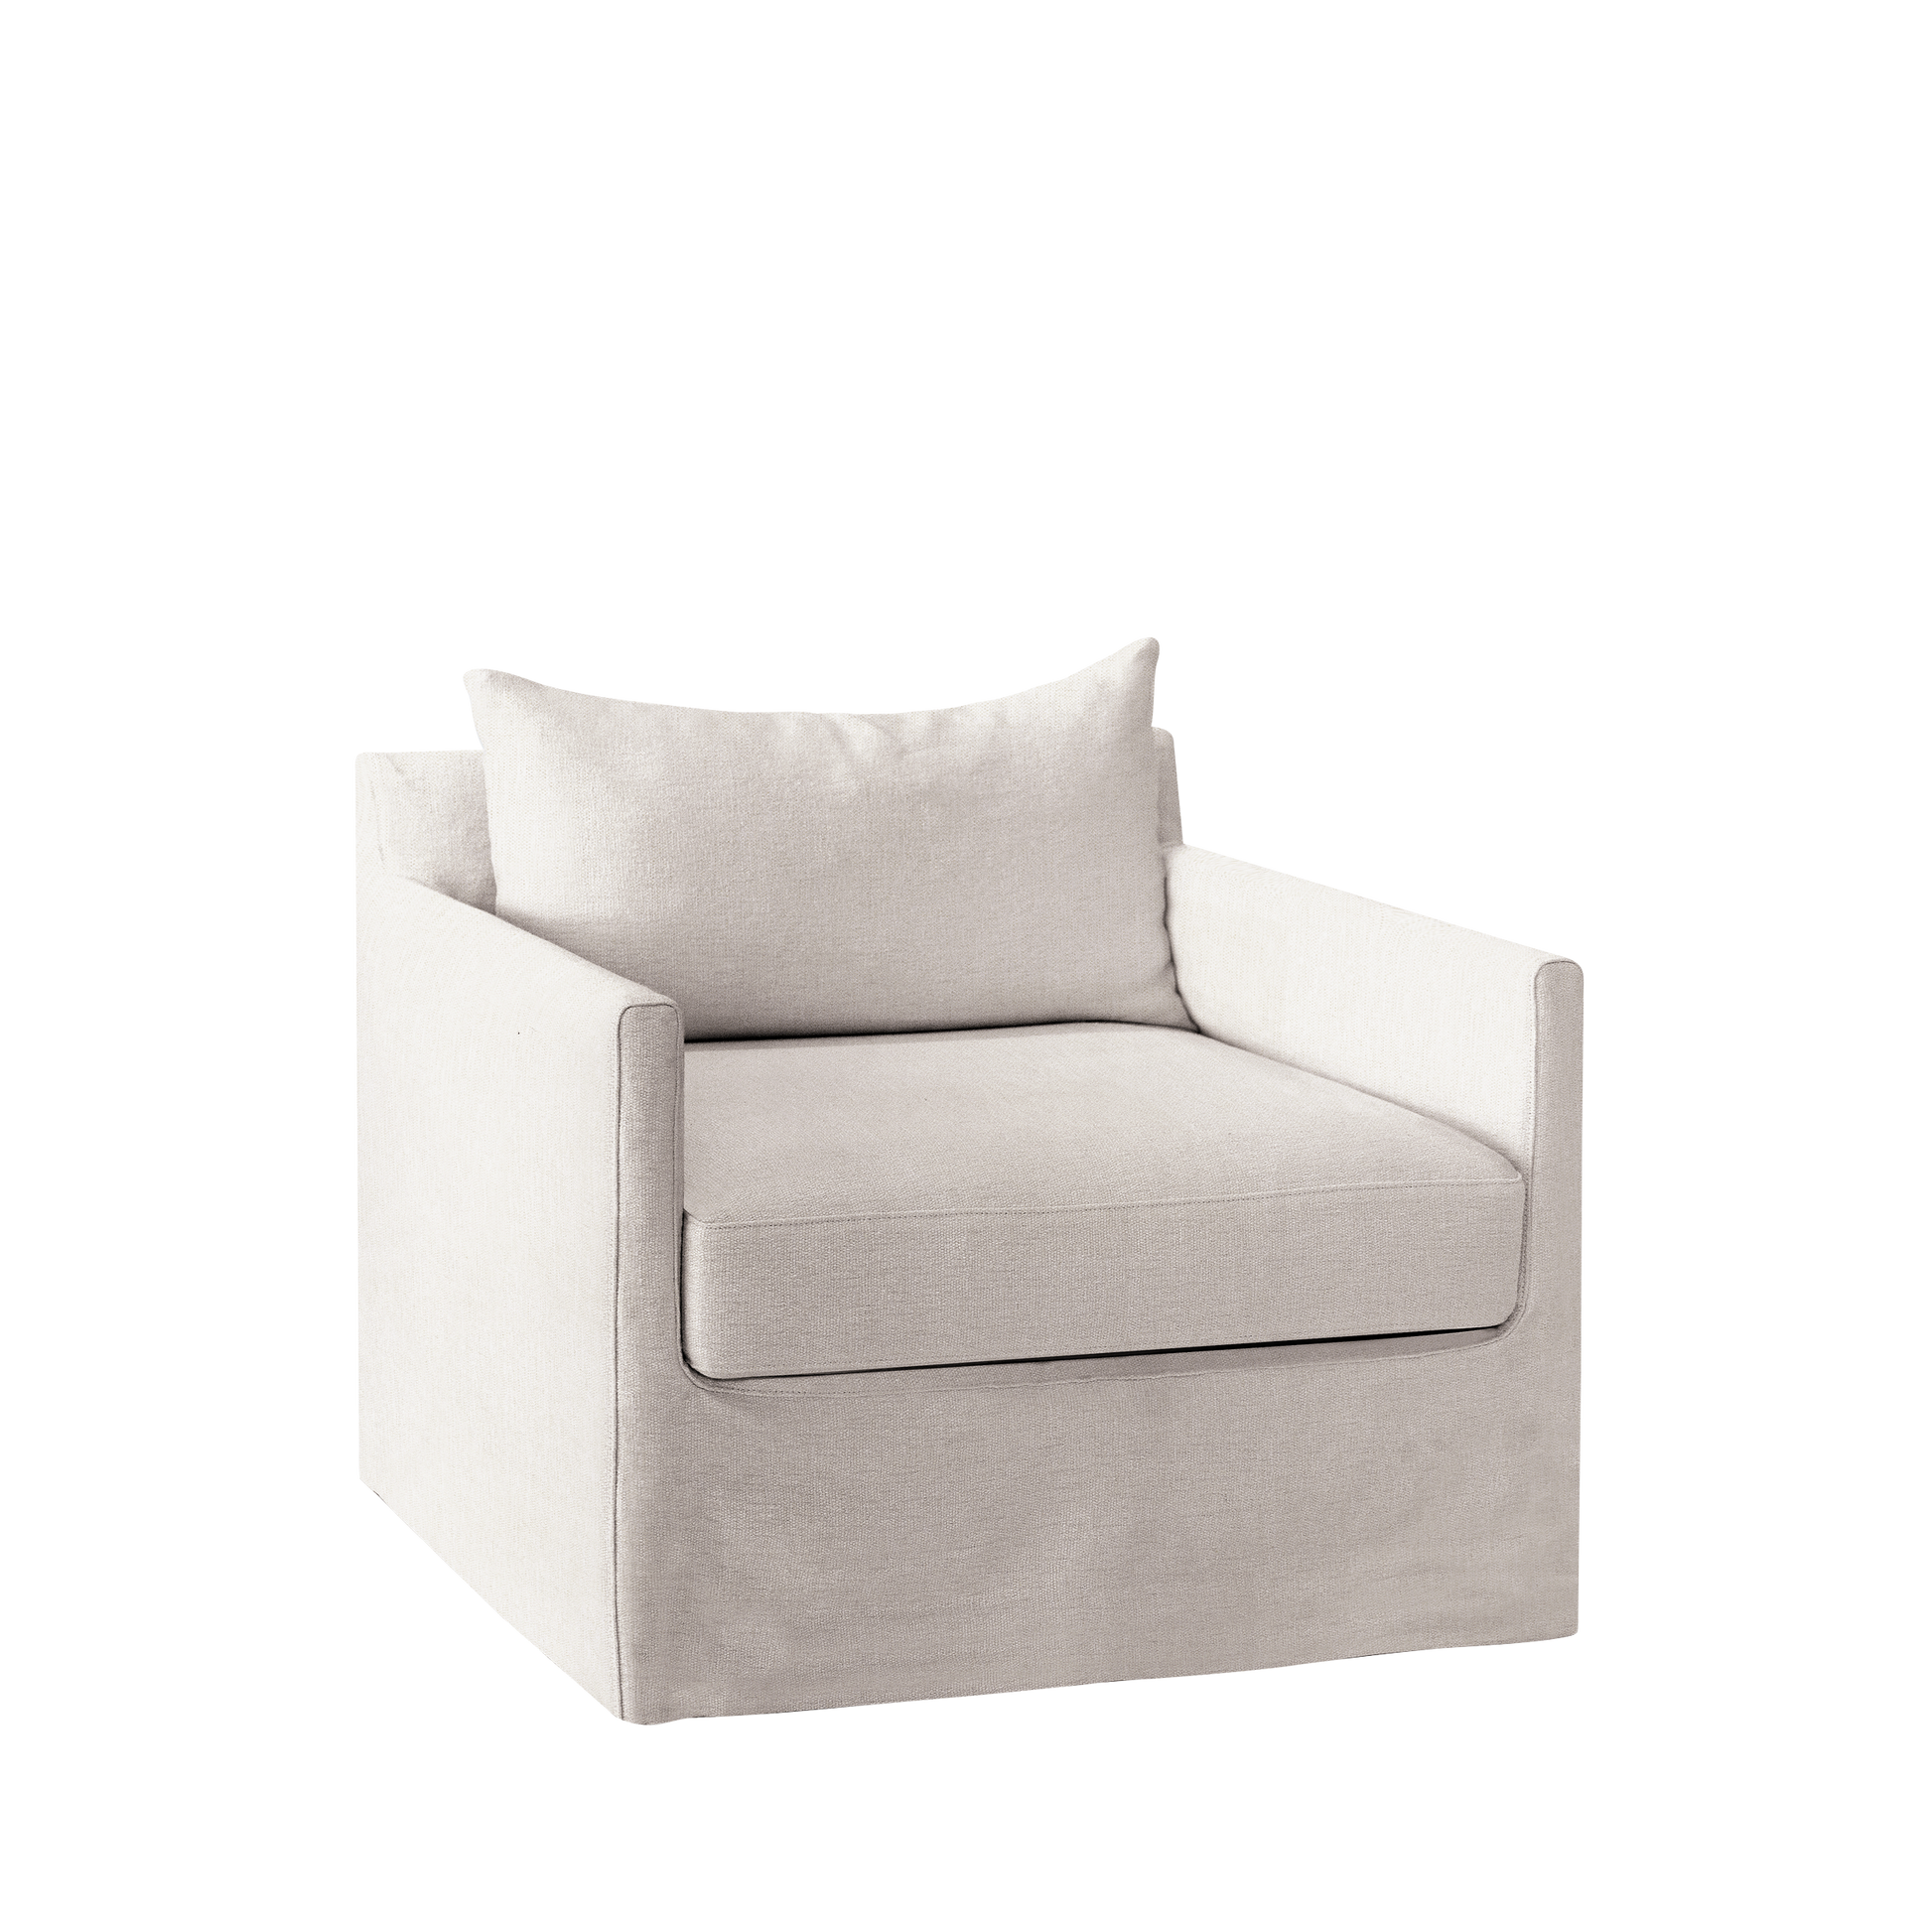 Extra wide and bolt white Alba lounge chair from a front view